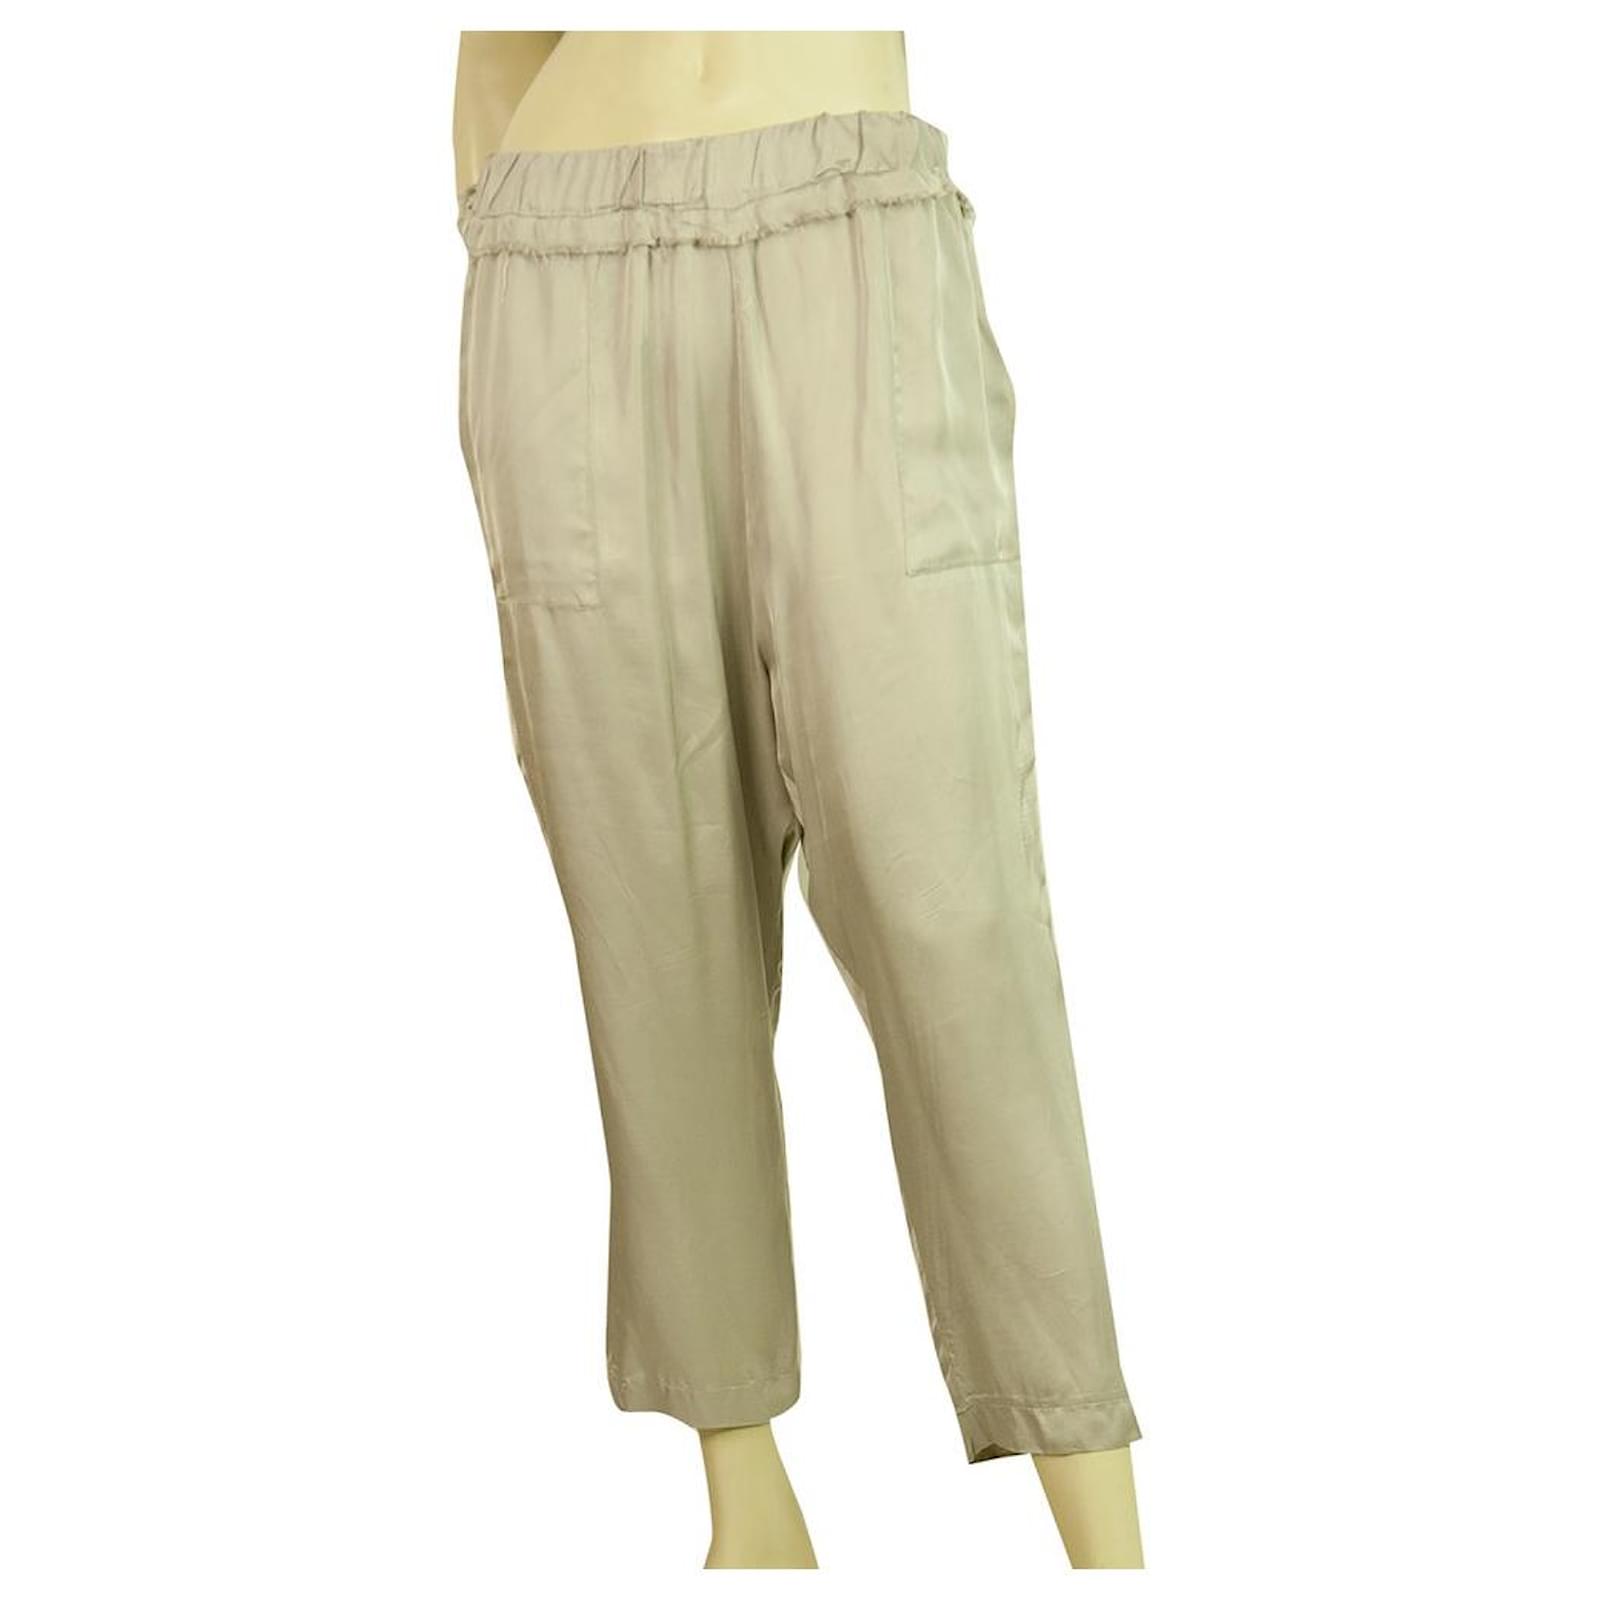 Viscose elasticatedwaist trousers with gold details  EMPORIO ARMANI Man